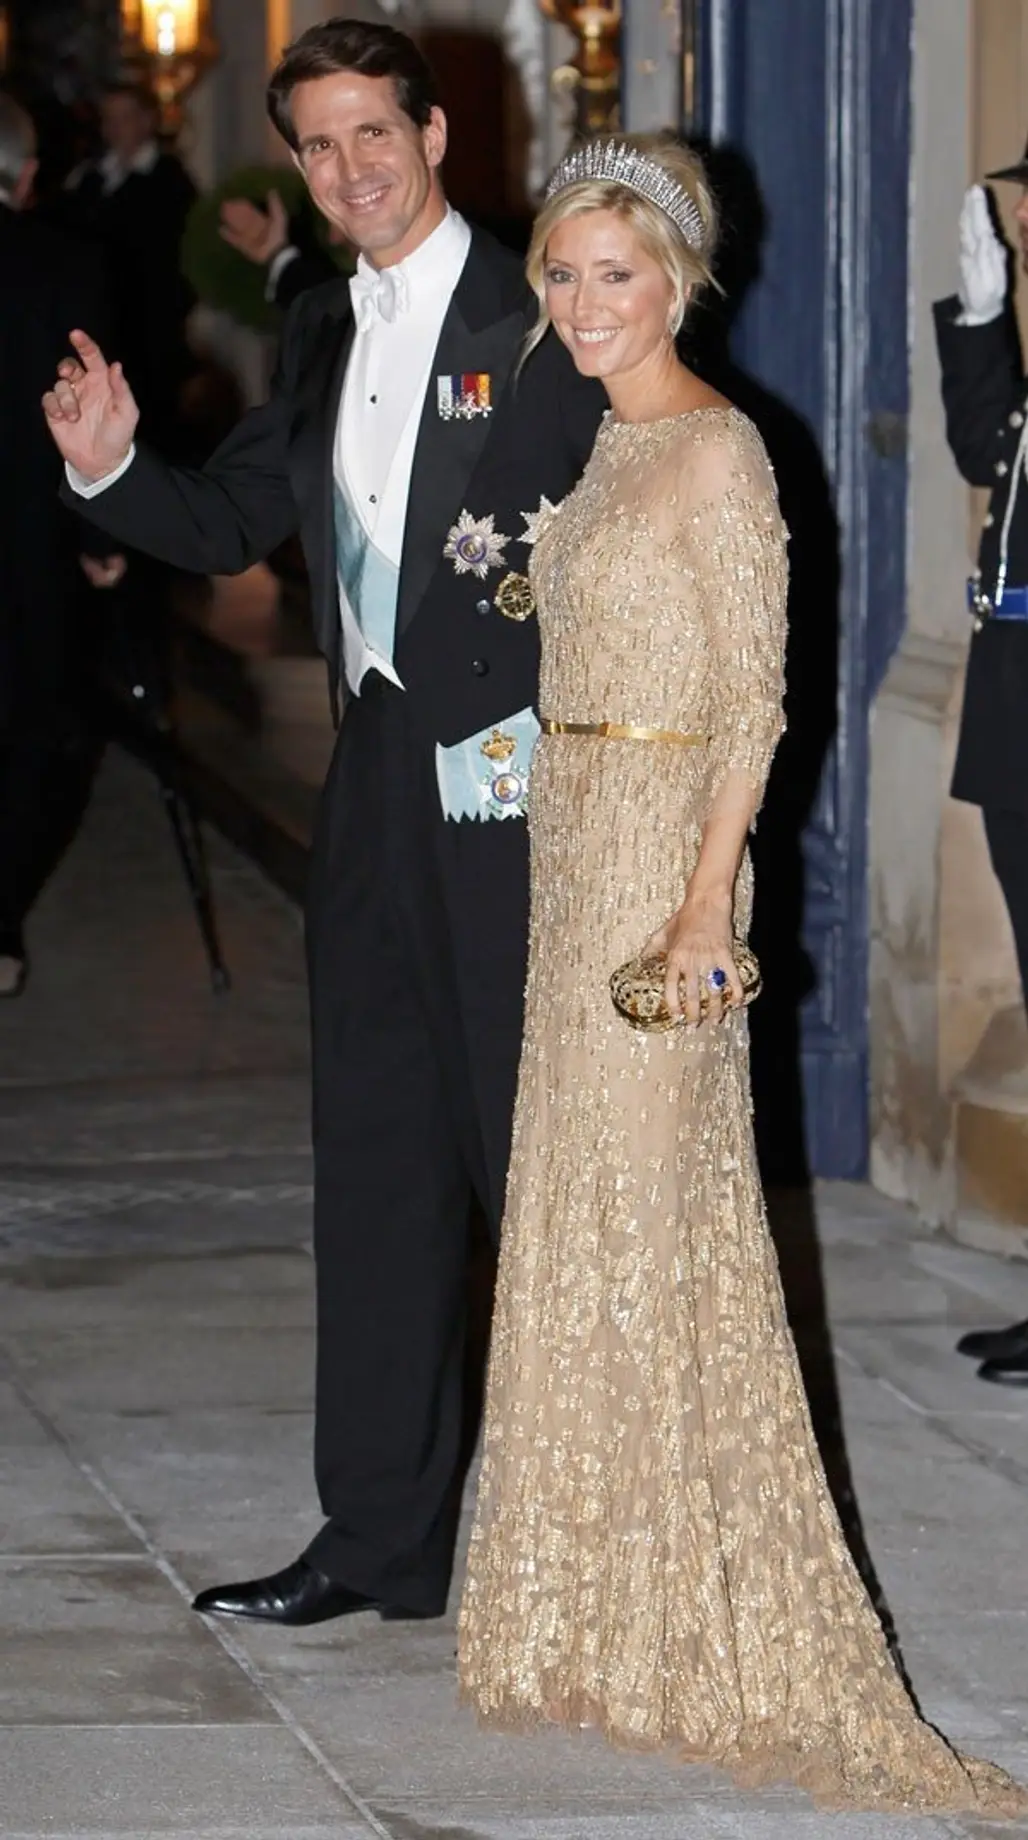 Crown Prince Pavlos and Marie-Chantal of Greece